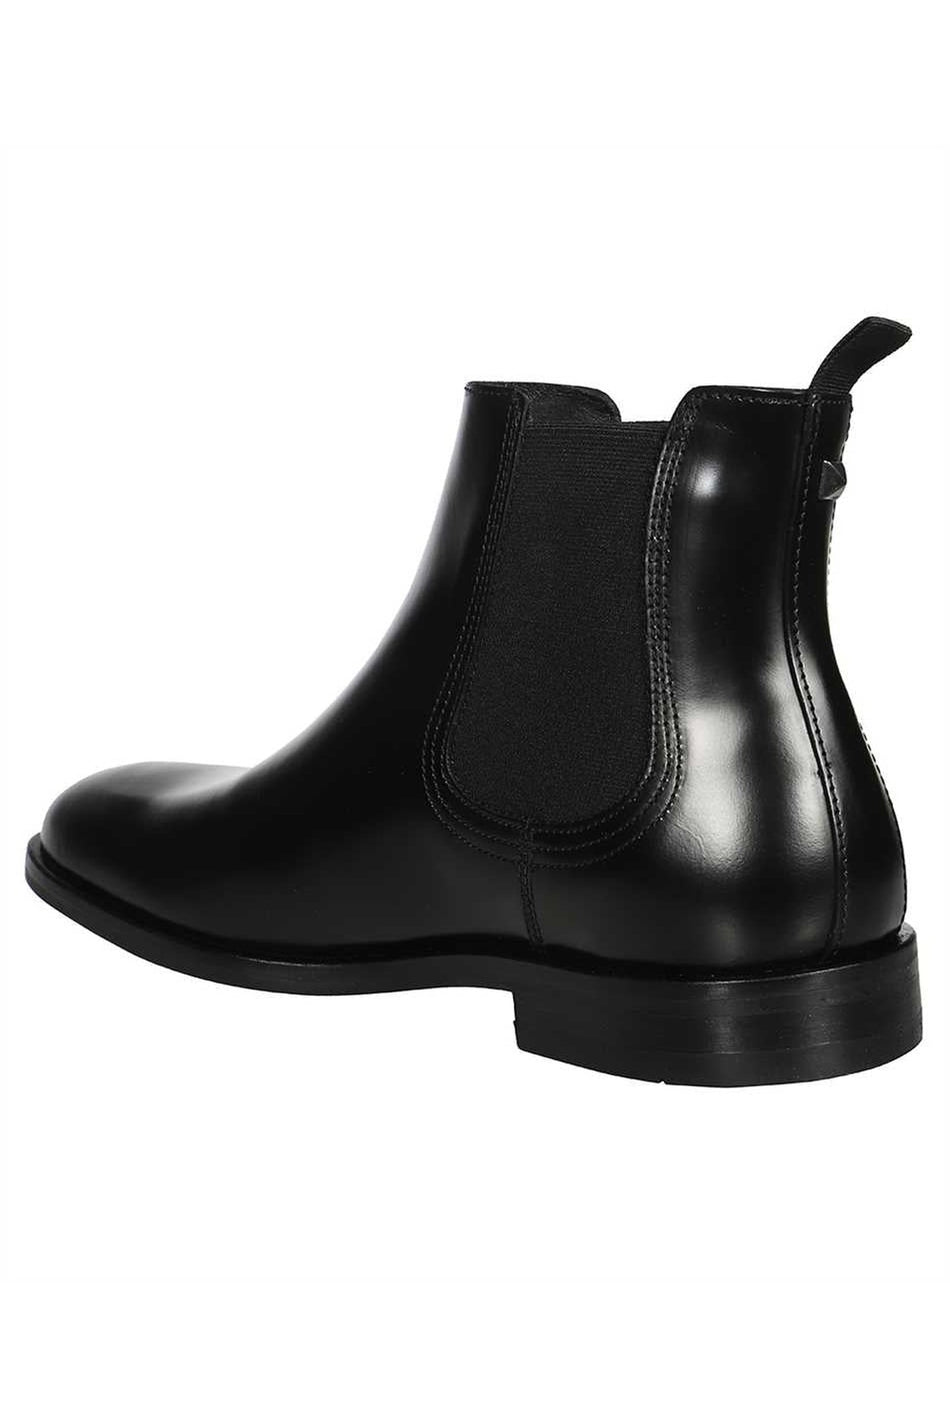 Leather Chelsea boots-Karl Lagerfeld-OUTLET-SALE-ARCHIVIST